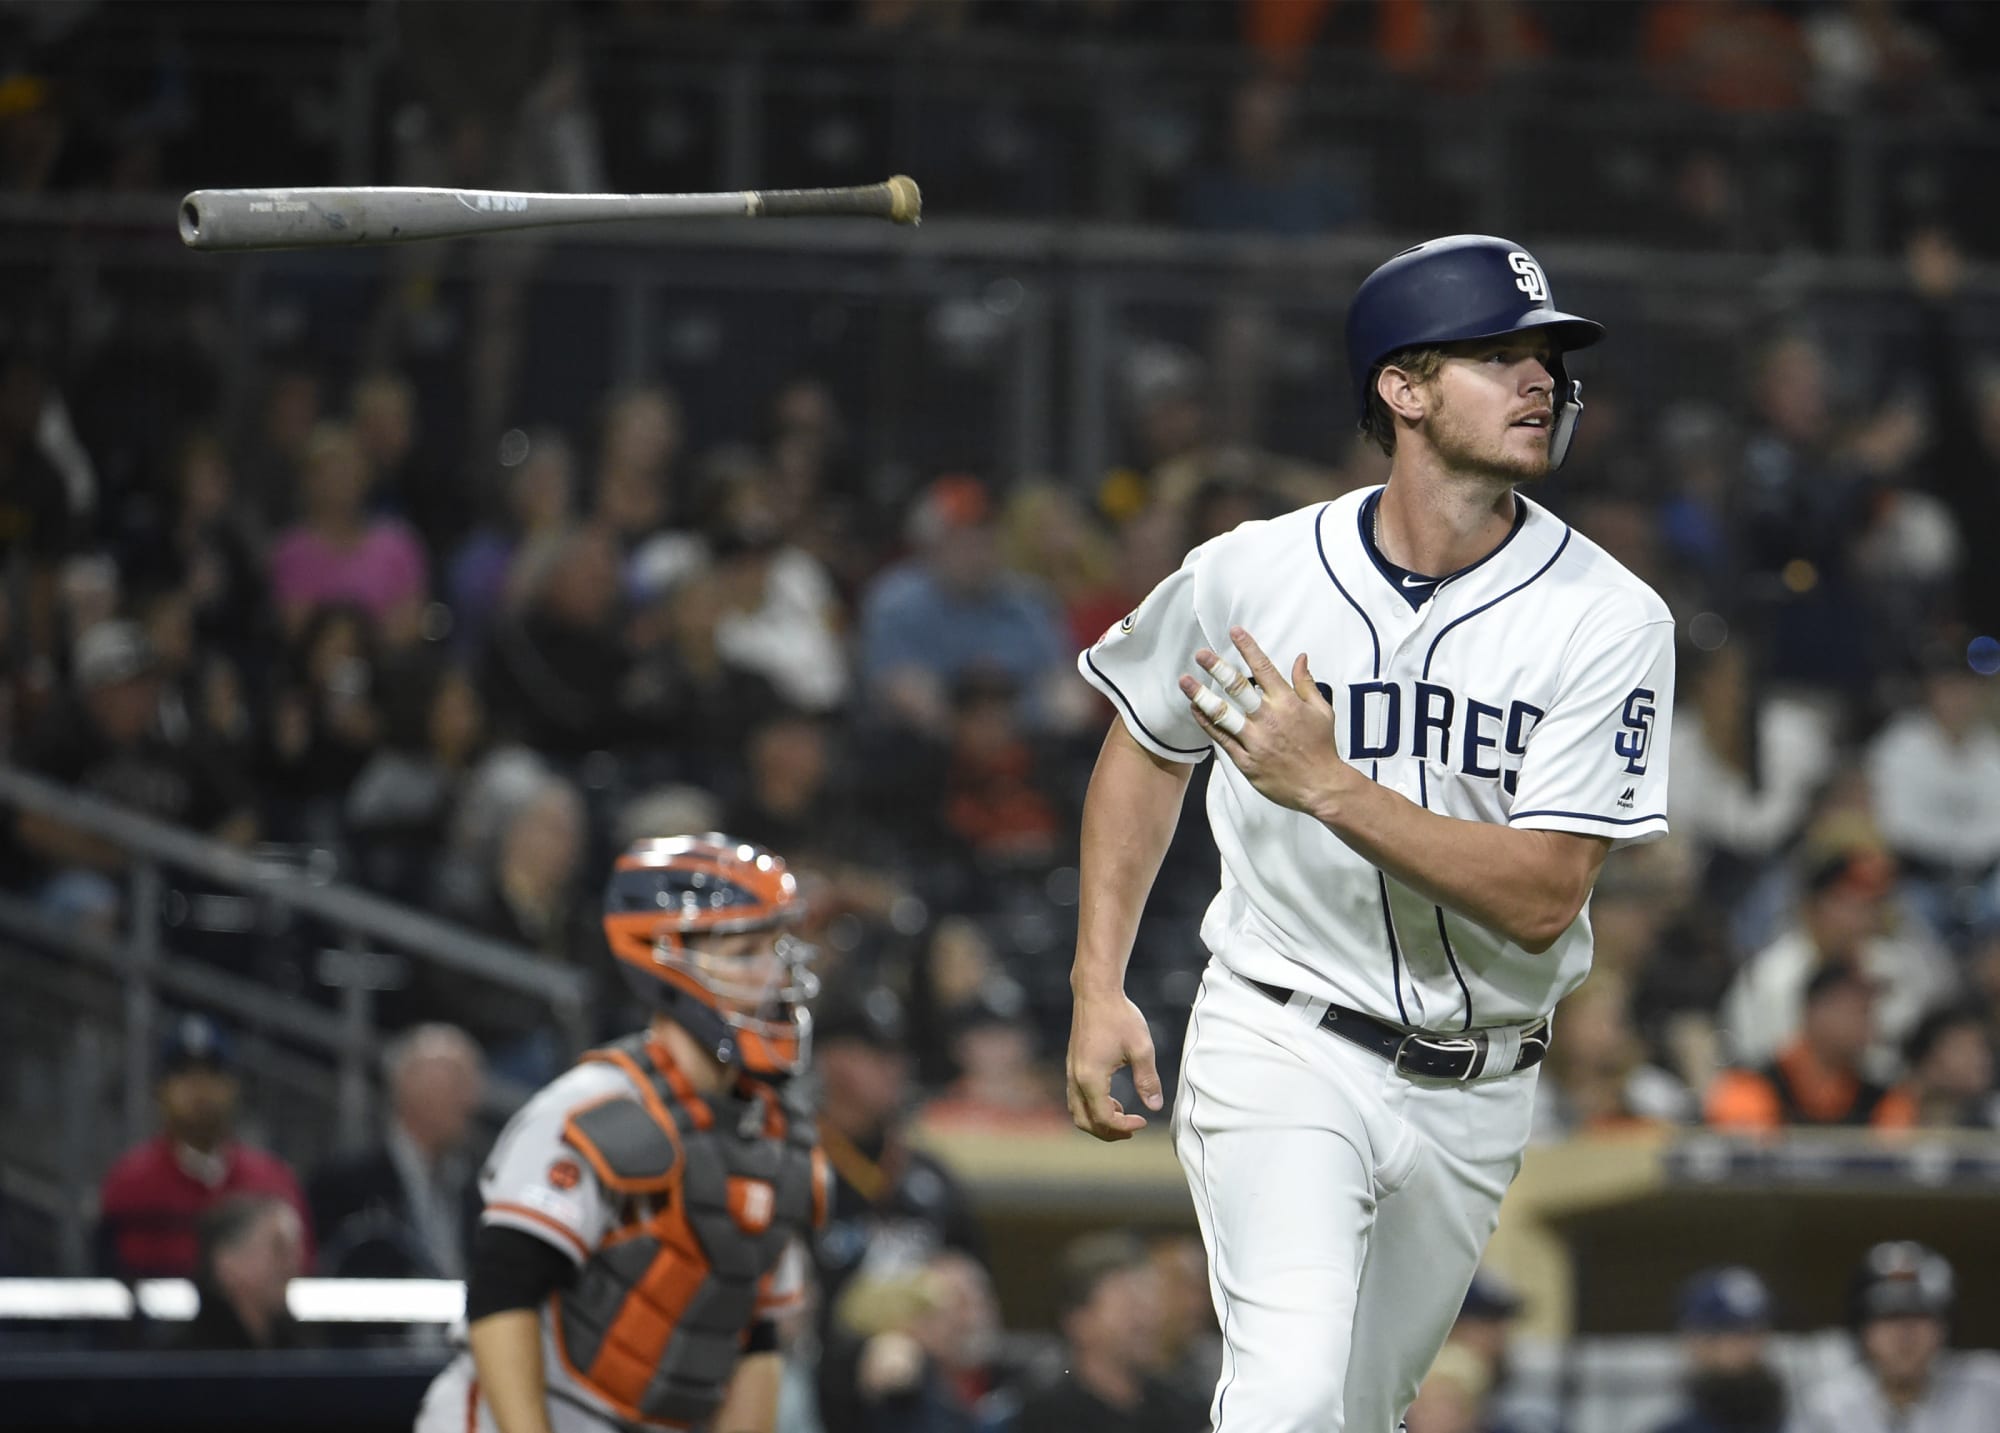 Padres Could Wil Myers Finally Live Up to Contract as a DH?